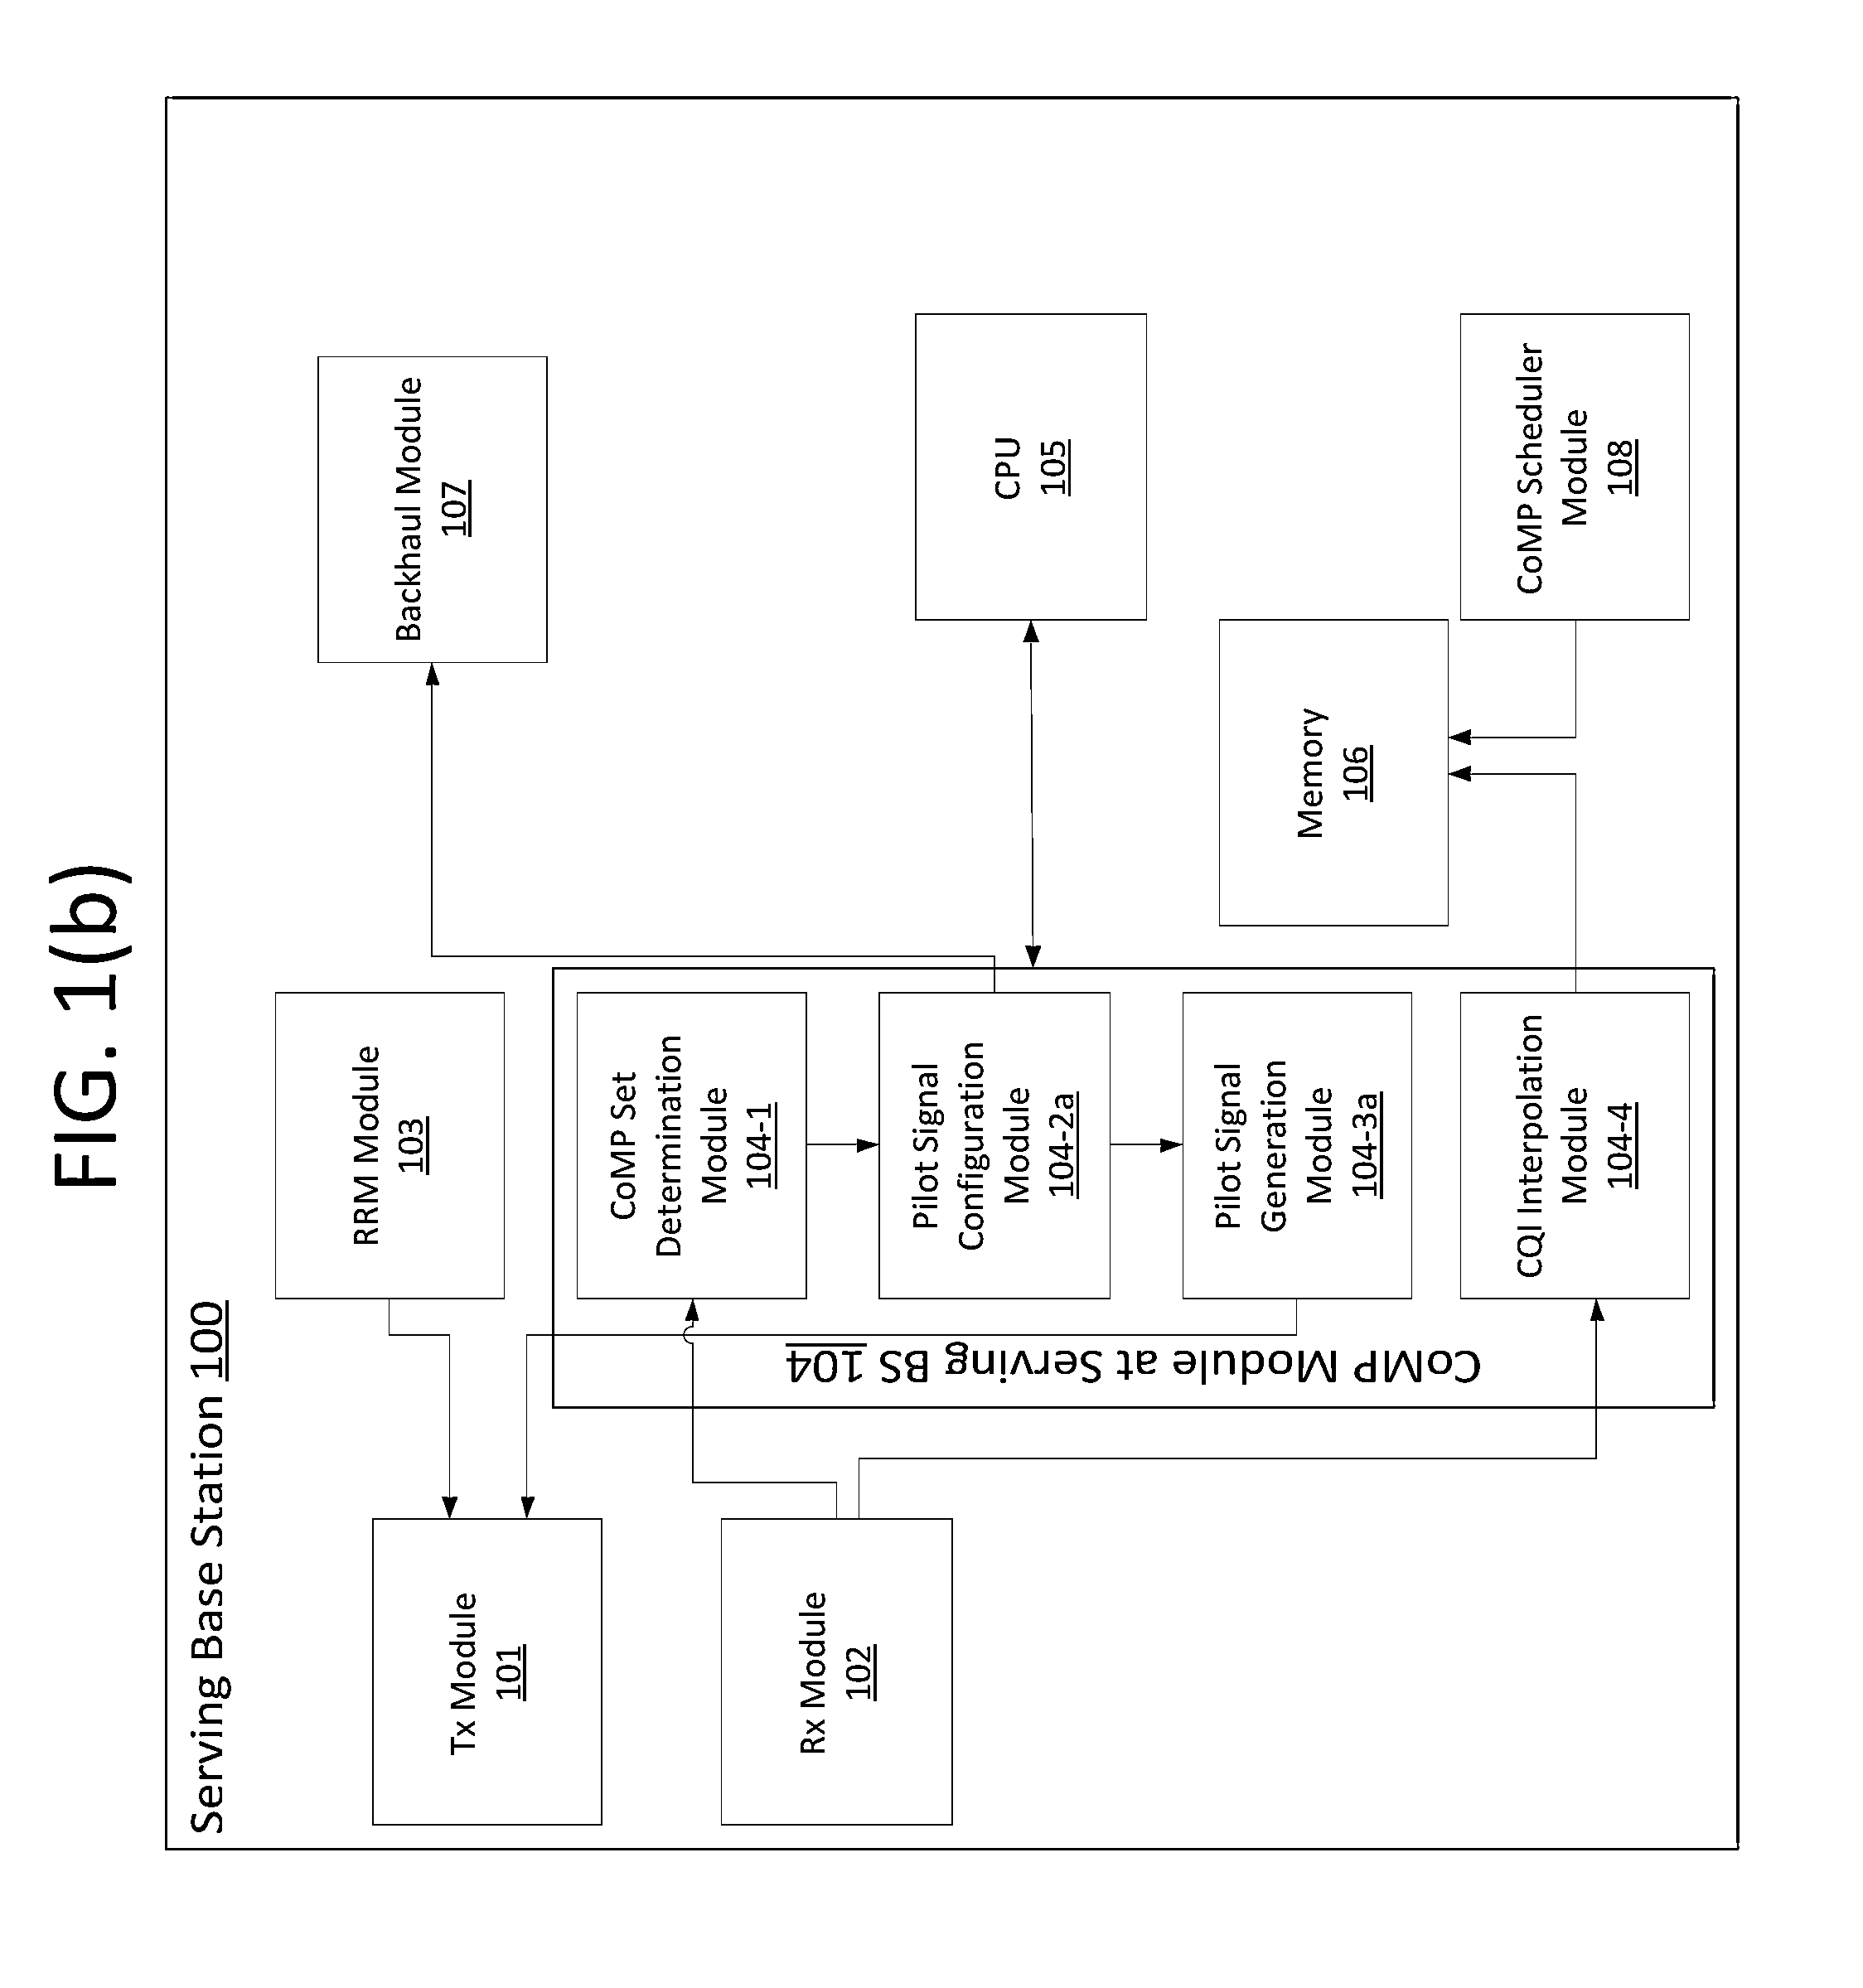 Configuration of pilot signals by network for enabling comp